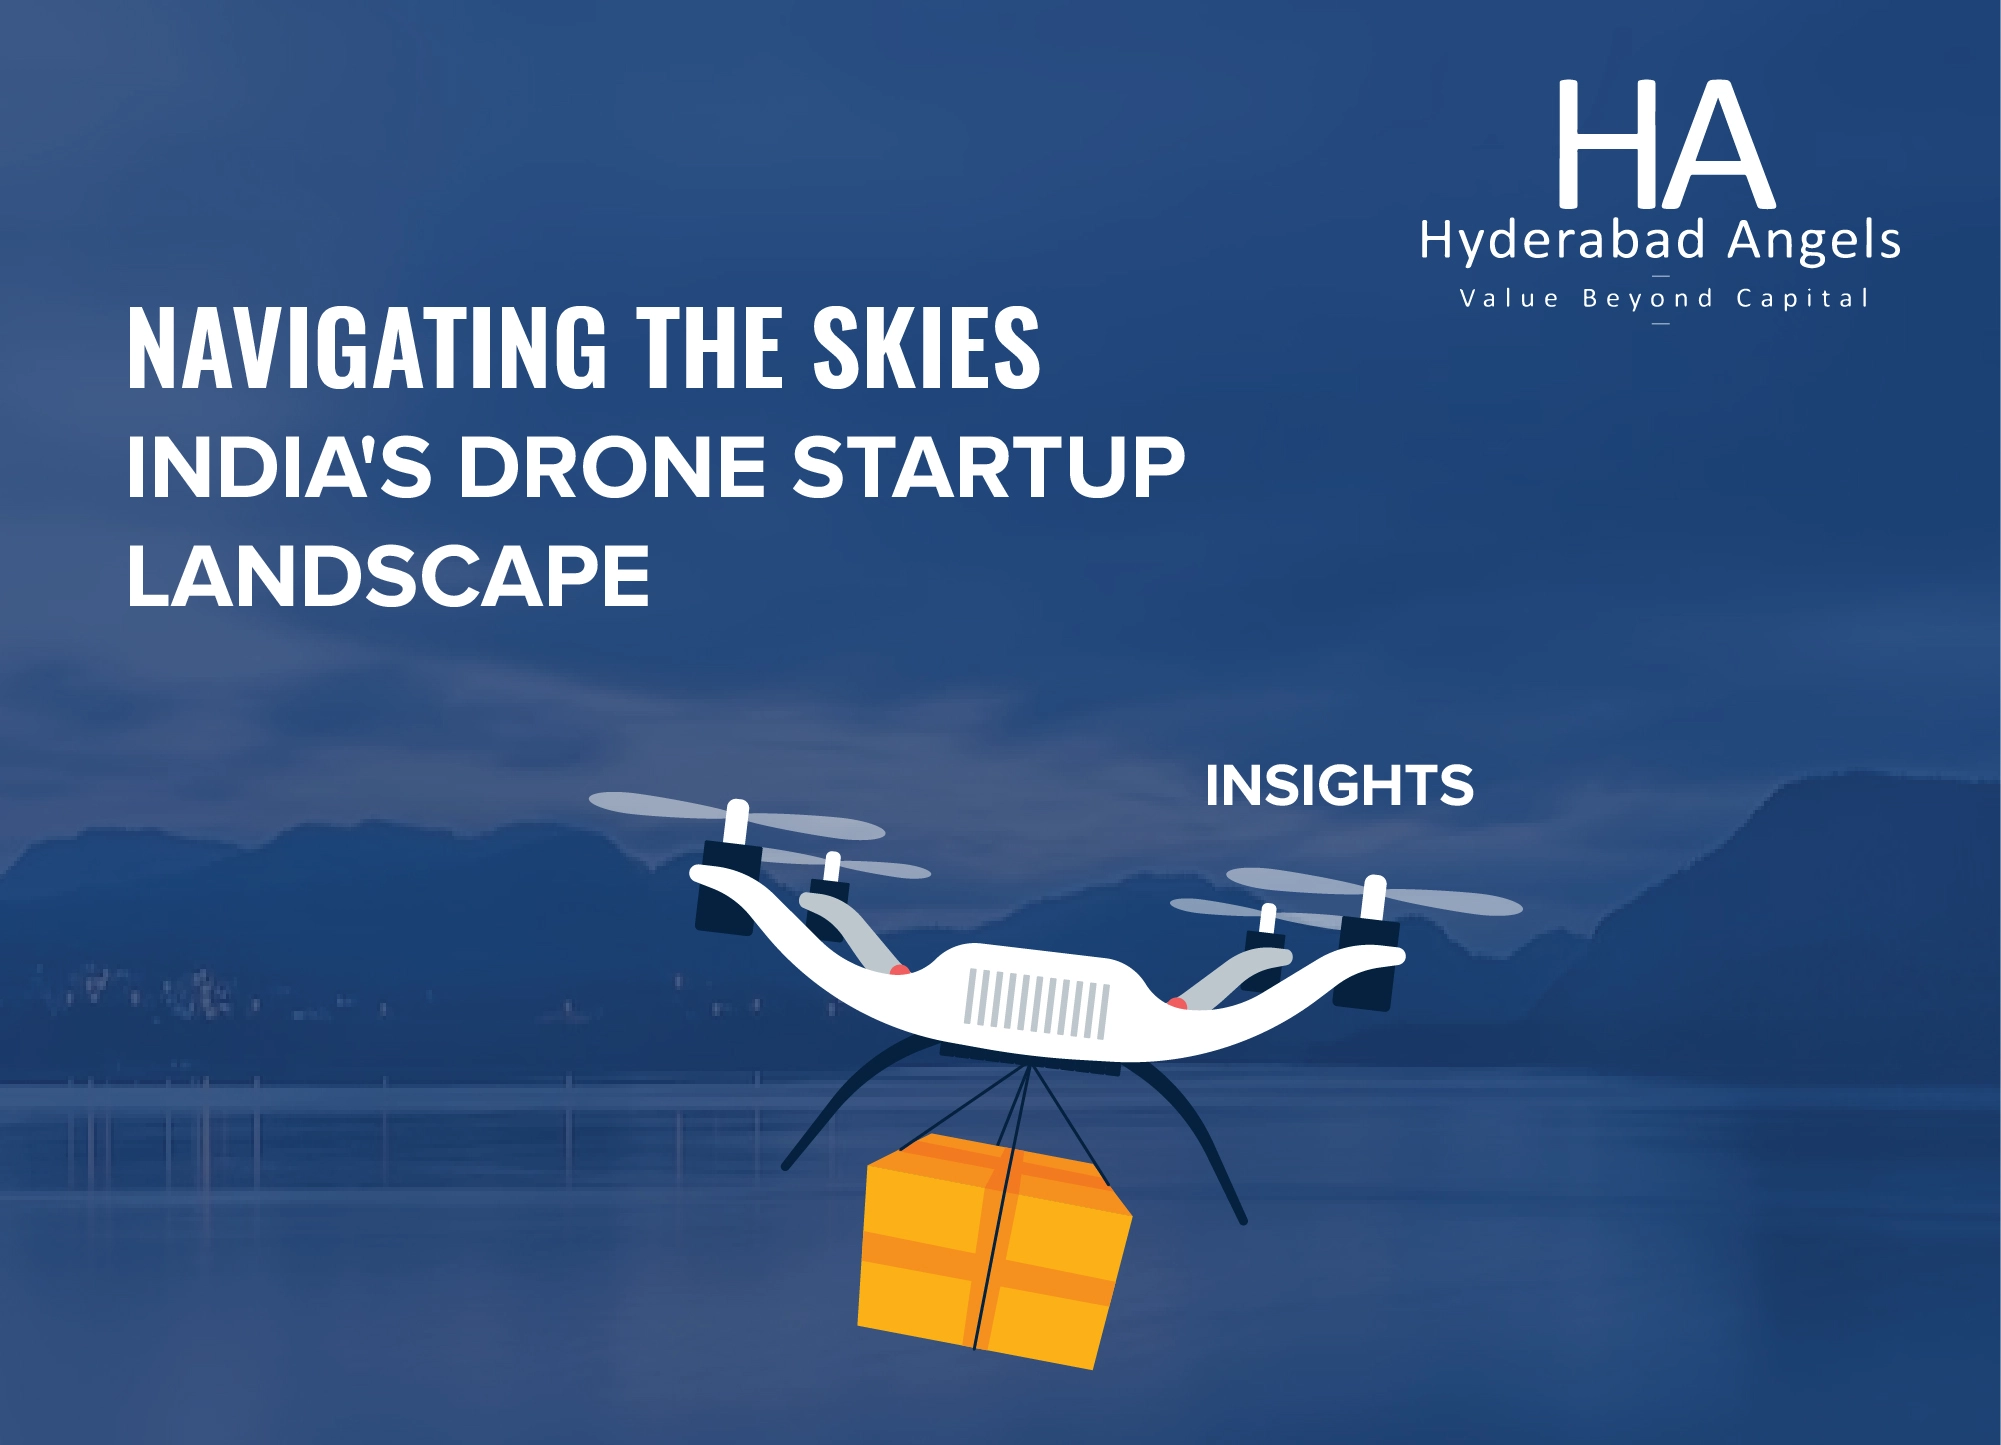 NAVIGATING THE SKIES: INDIA’S DRONE STARTUP LANDSCAPE